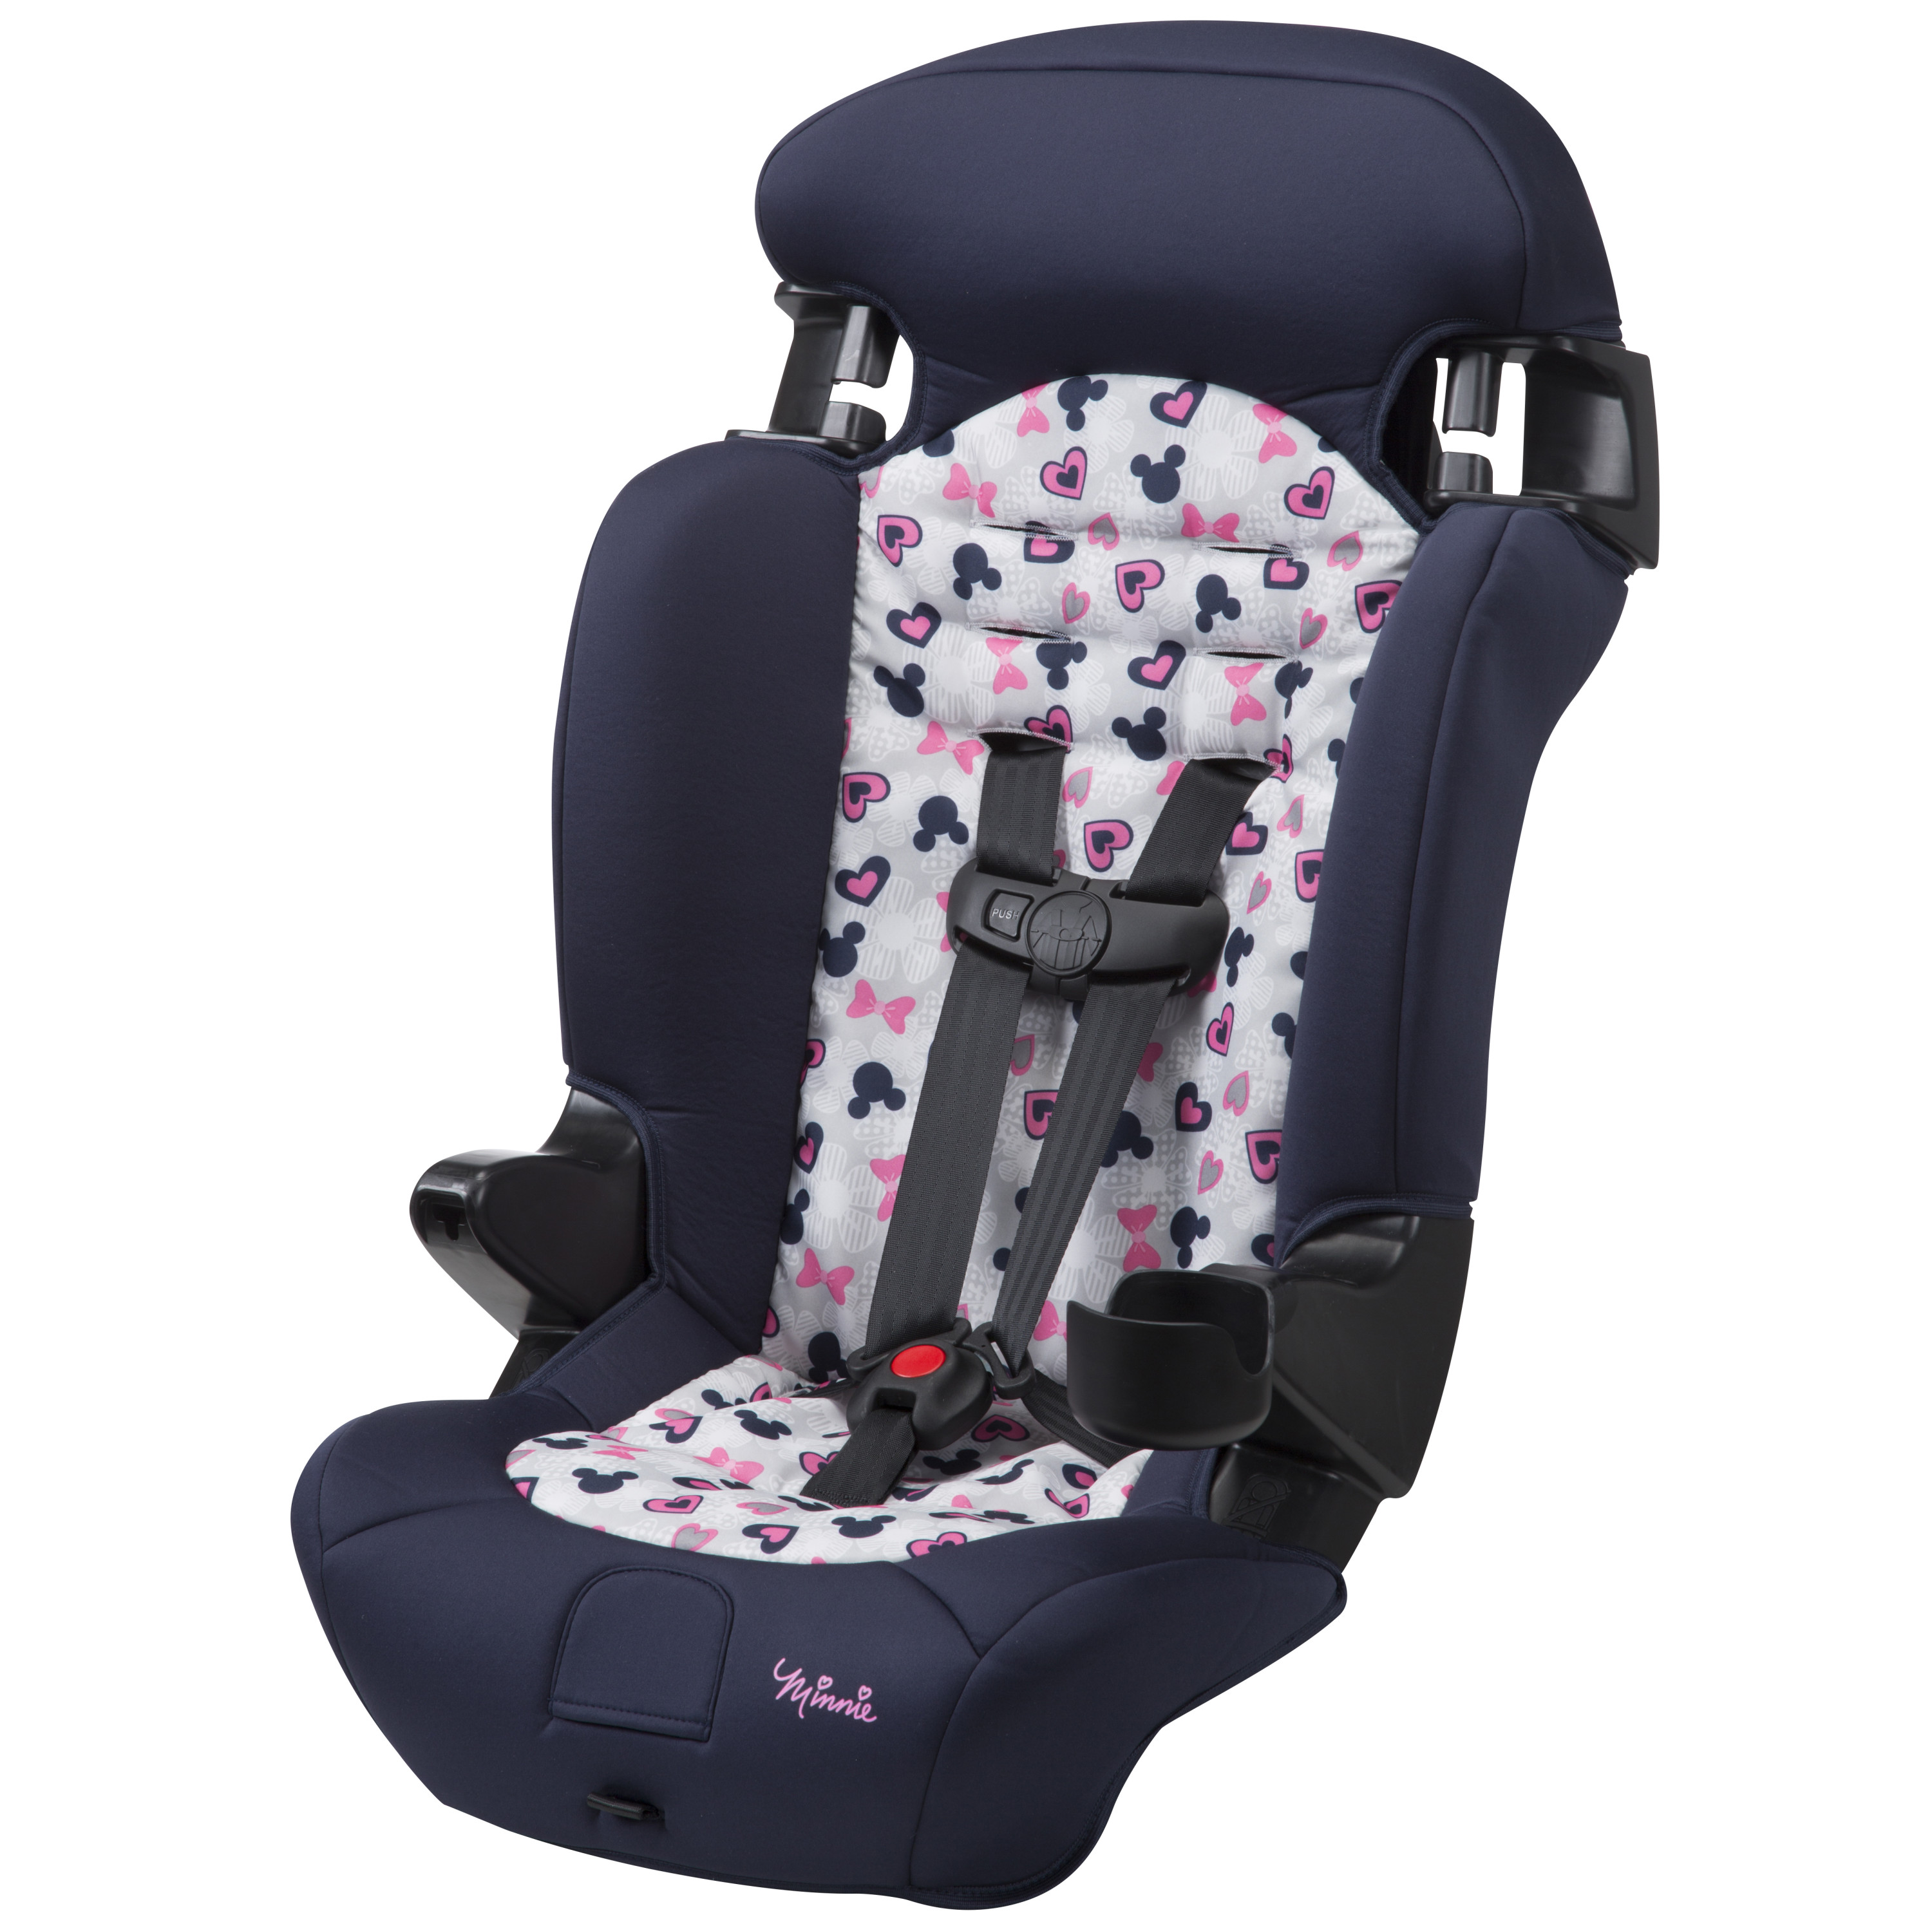 Disney Baby Finale 2-in-1 Booster Car Seat, Minnie's Favorite Things - image 1 of 14